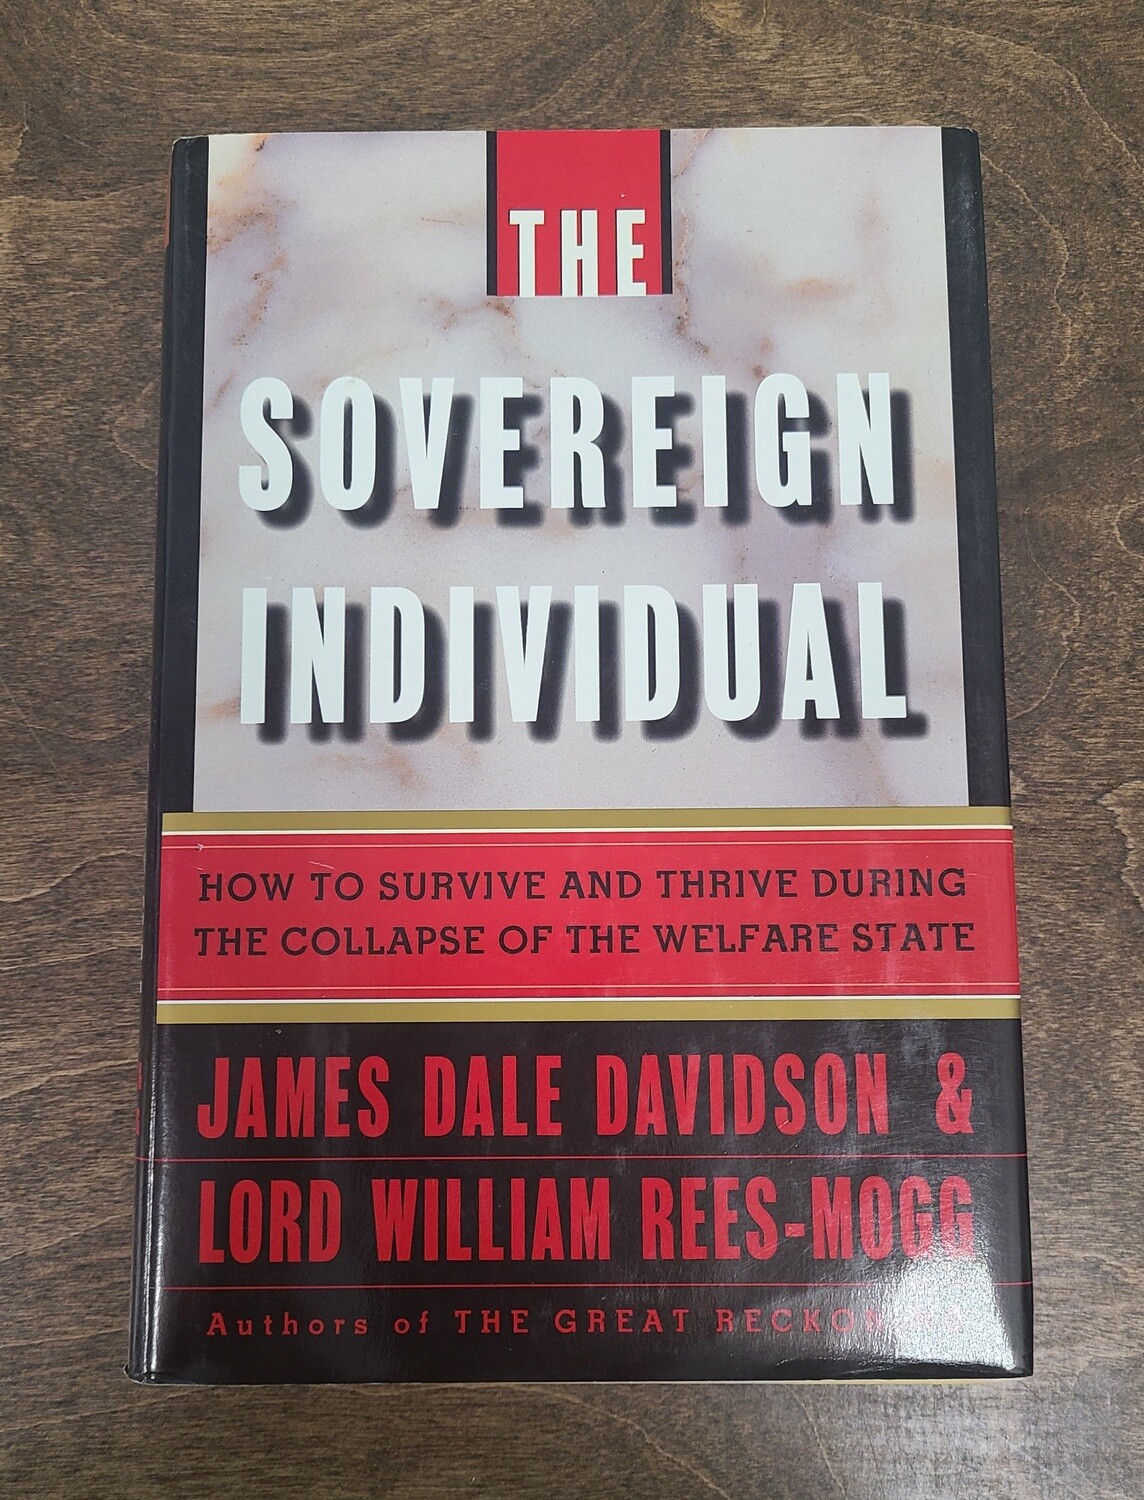 The Sovereign Individual: How to Survive and Thrive During the Collapse of the Welfare State by James Dale Davidson and Lord William Rees-Mogg